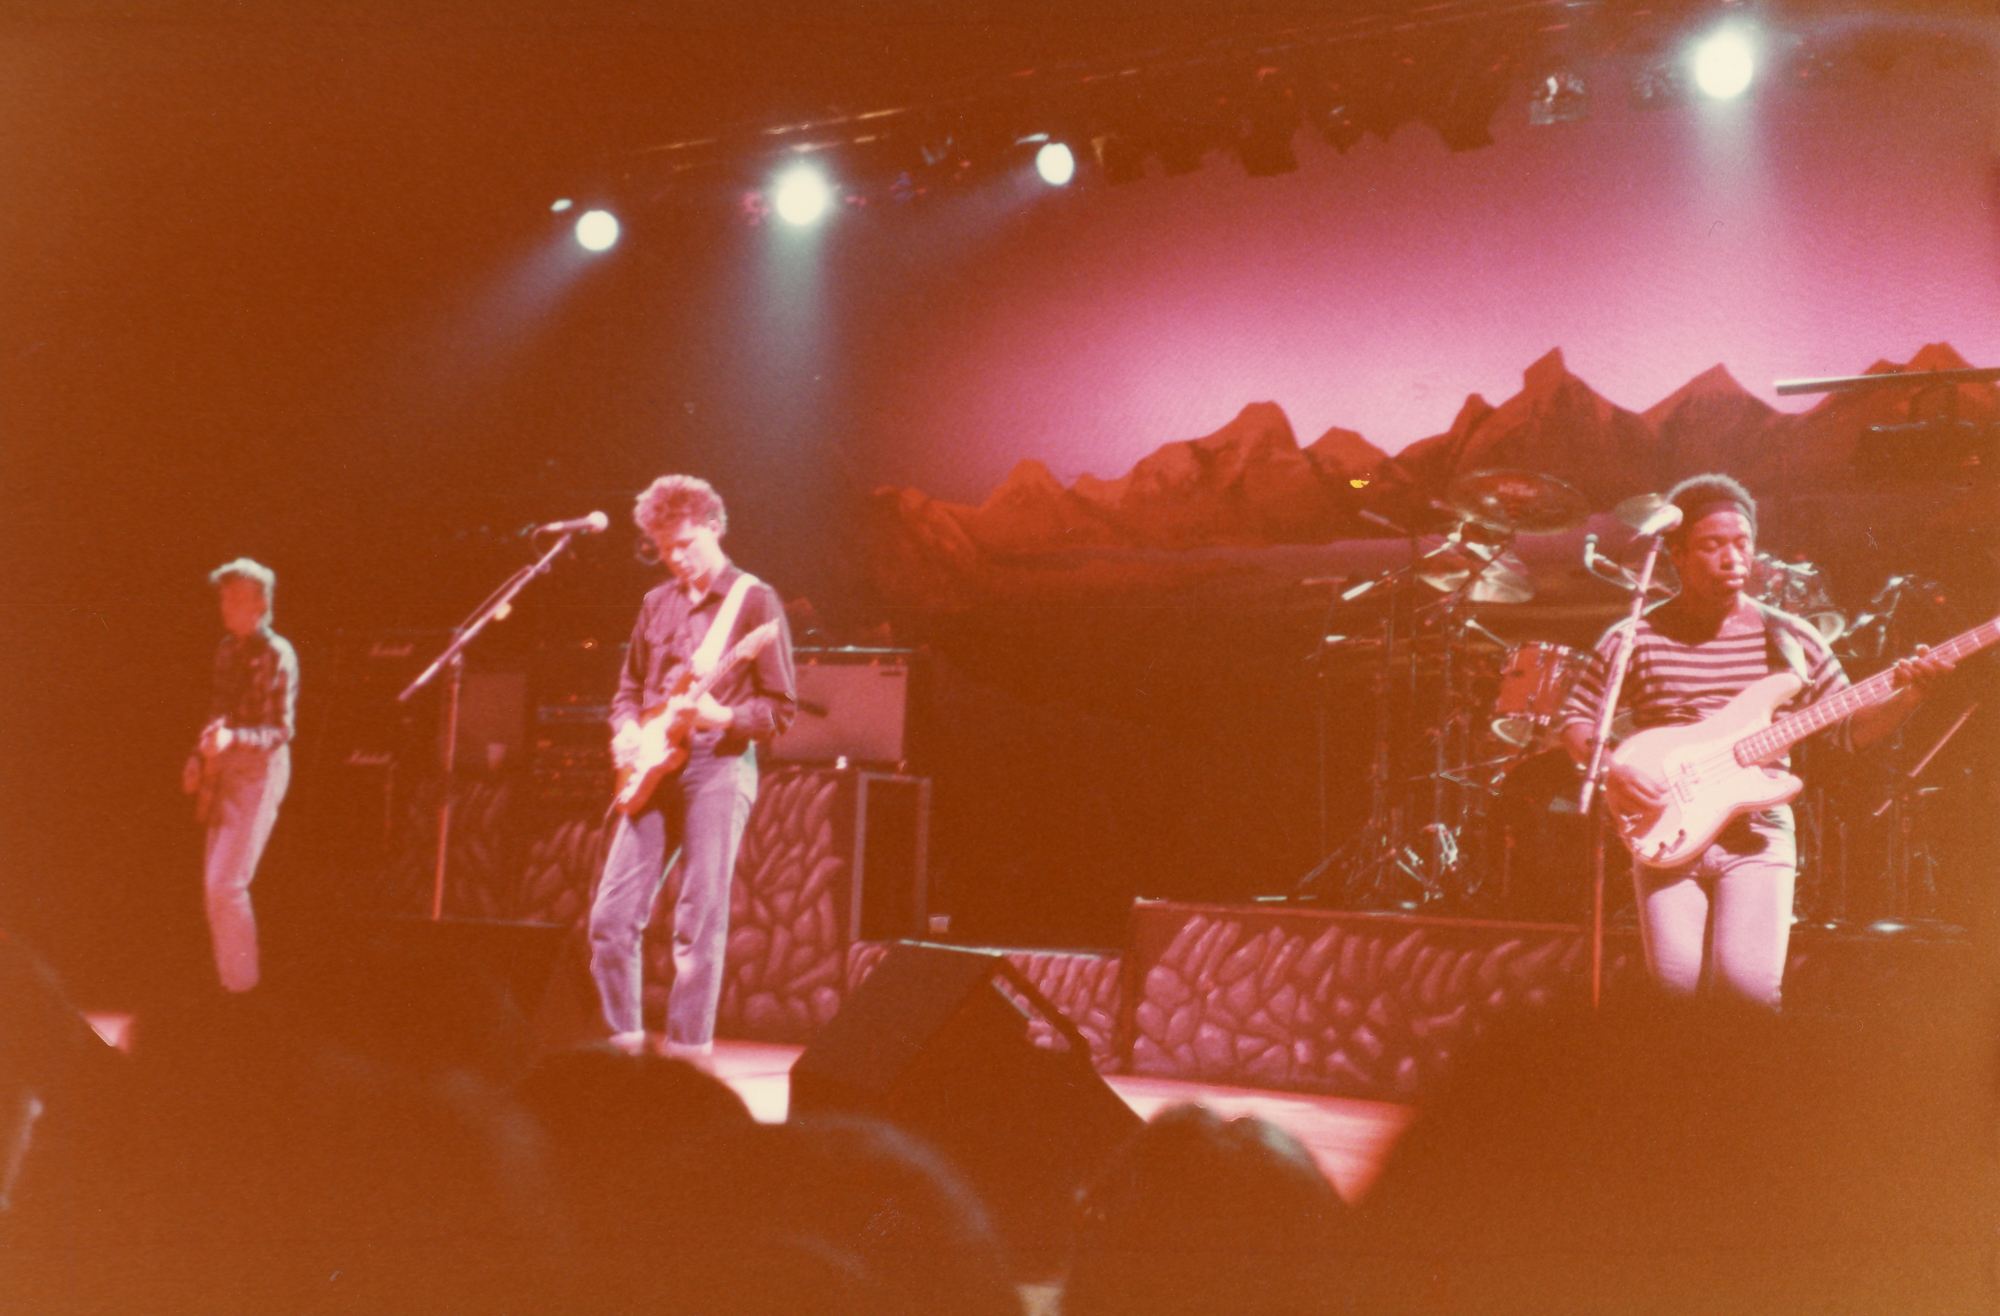 Big Country at the Mahaffey Theater - St. Petersburg, FL - 1984.